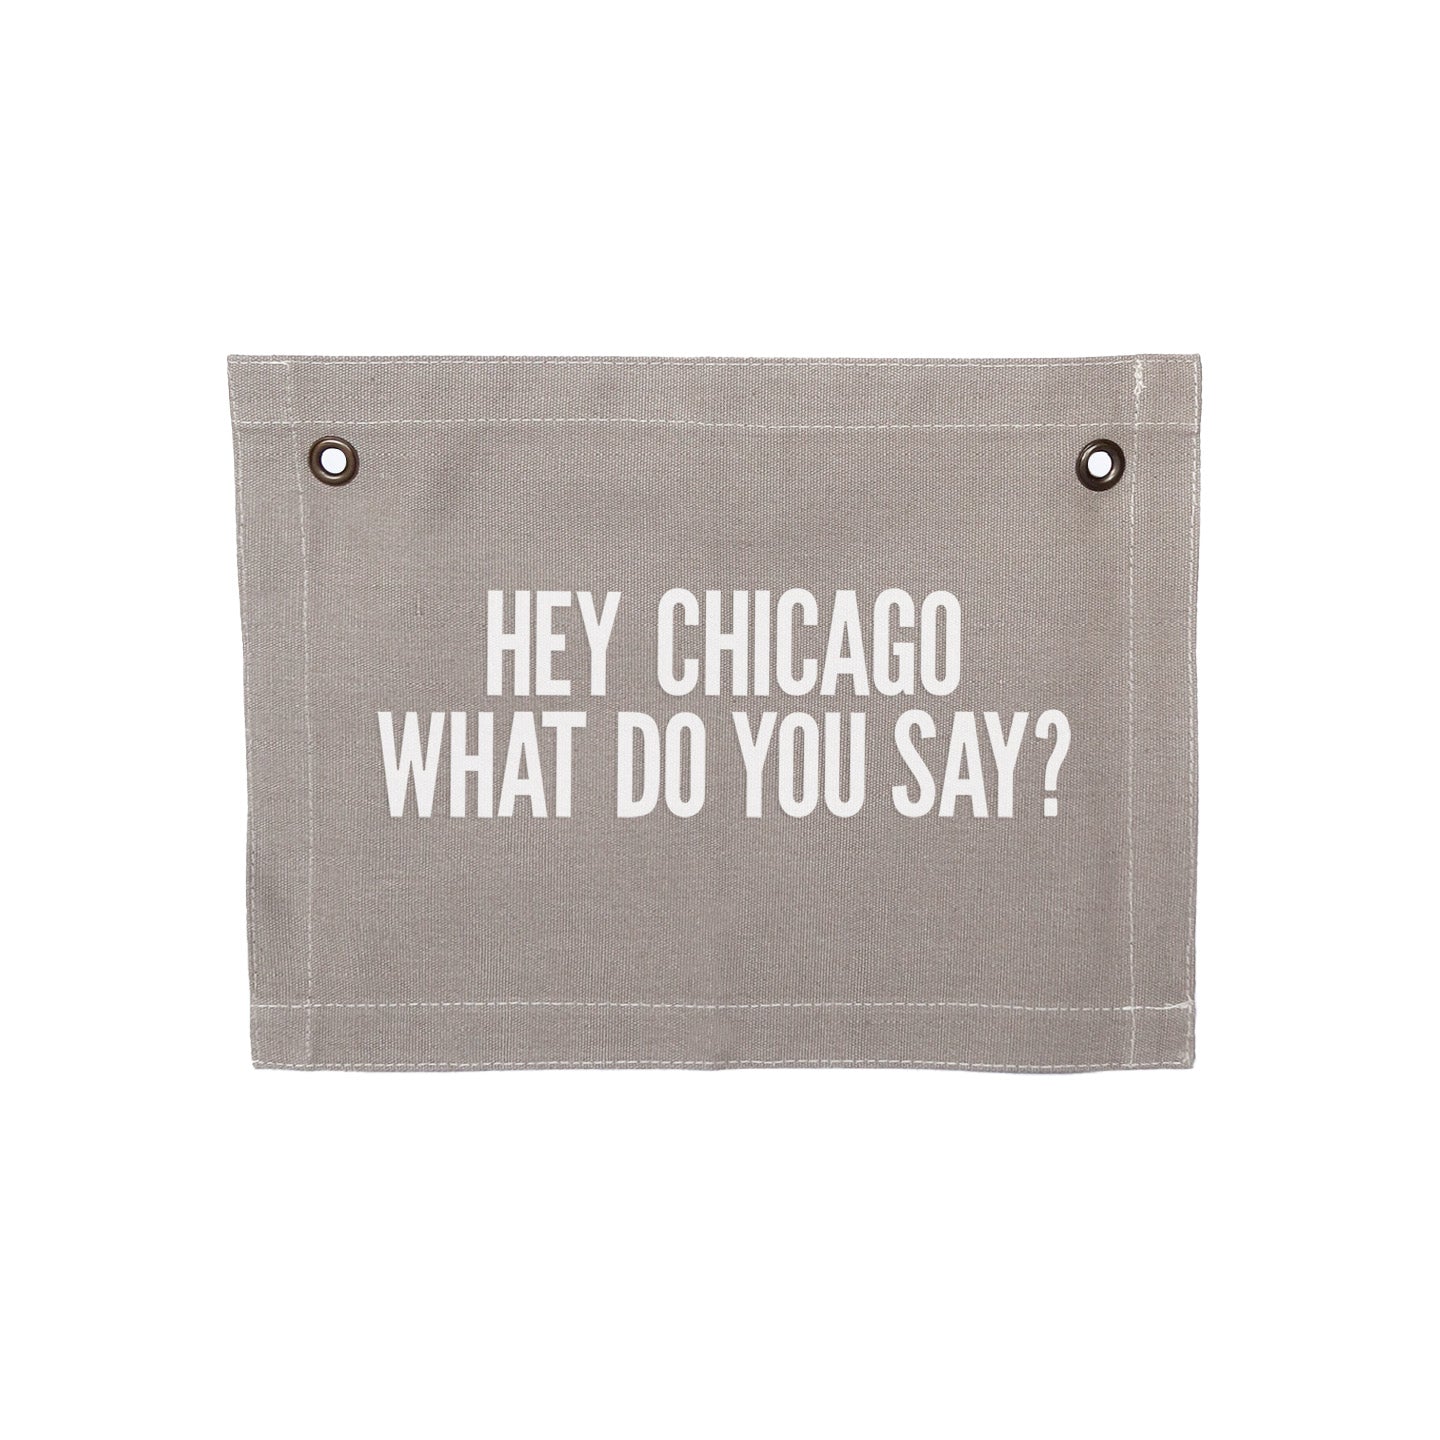 Hey Chicago Small Canvas Flag